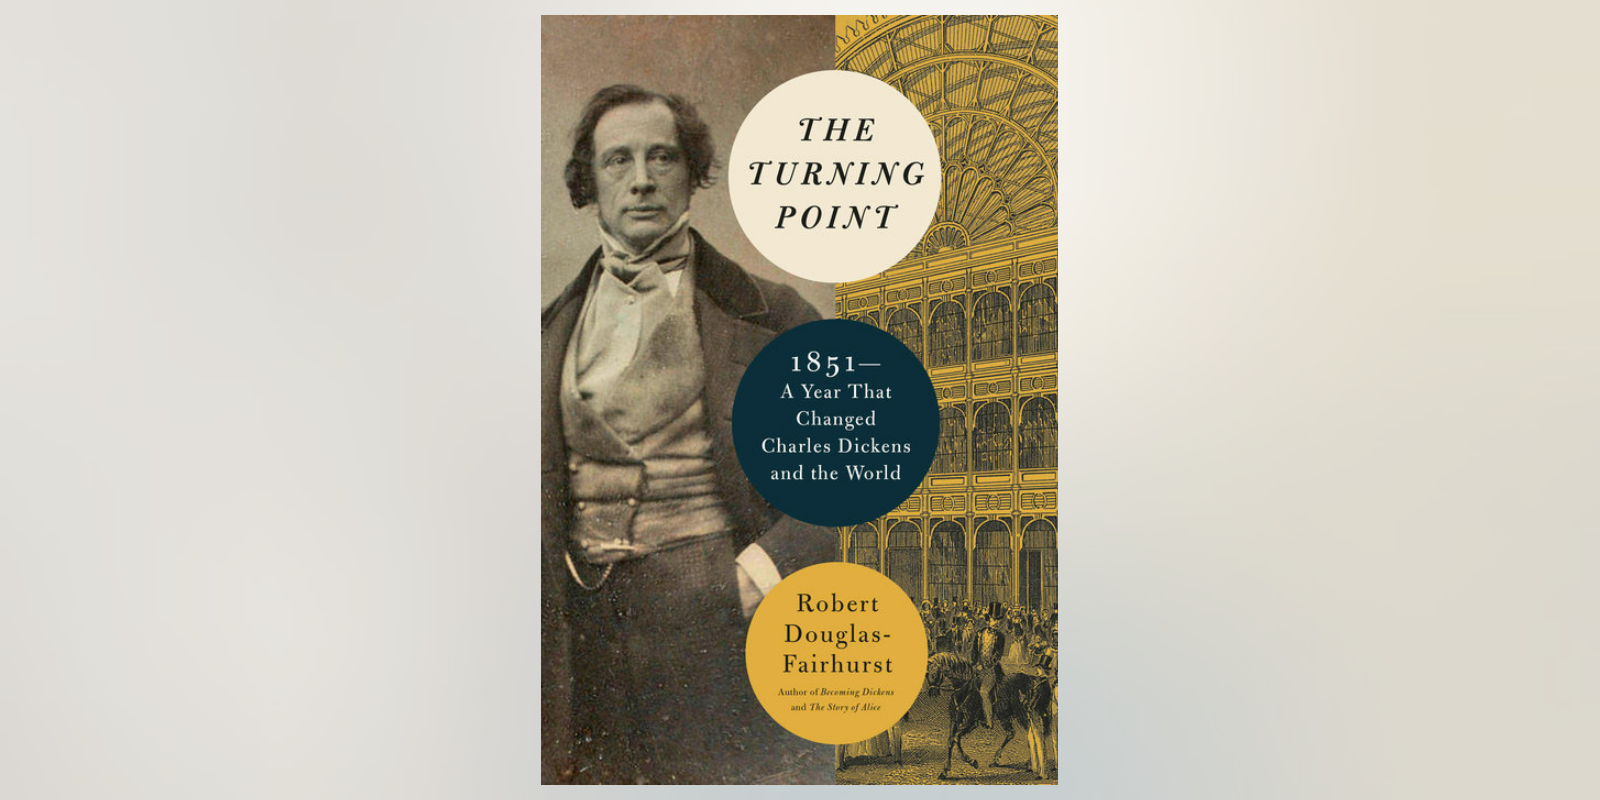 The Turning Point: 1851—A Year That Changed Charles Dickens and the World By Robert Douglas-Fairhurst